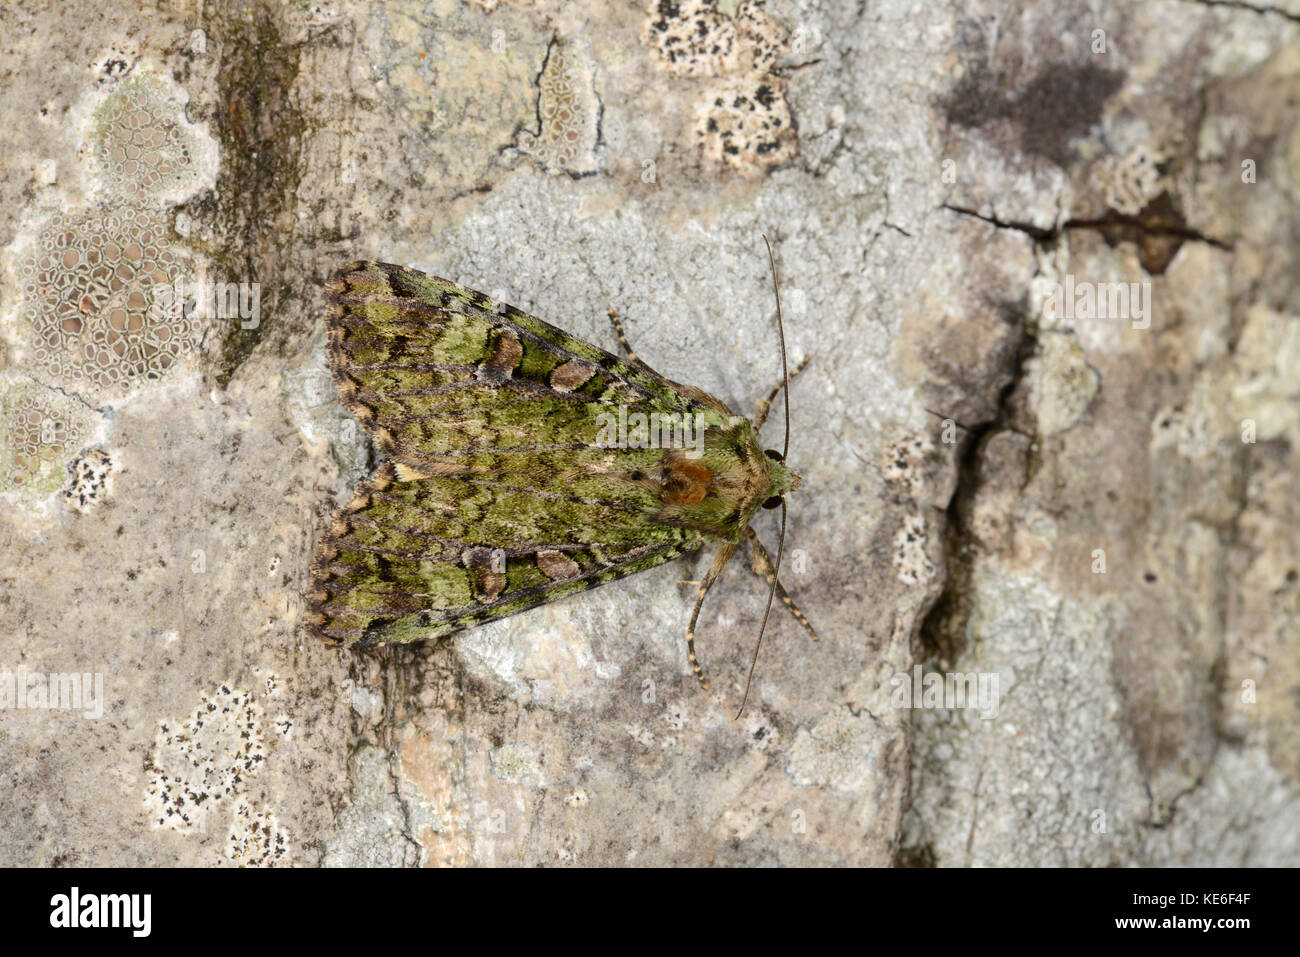 Green Arches Moth (Anaplectoides prasina) adult at rest on tree trunk, Monmouth, Wales, June Stock Photo